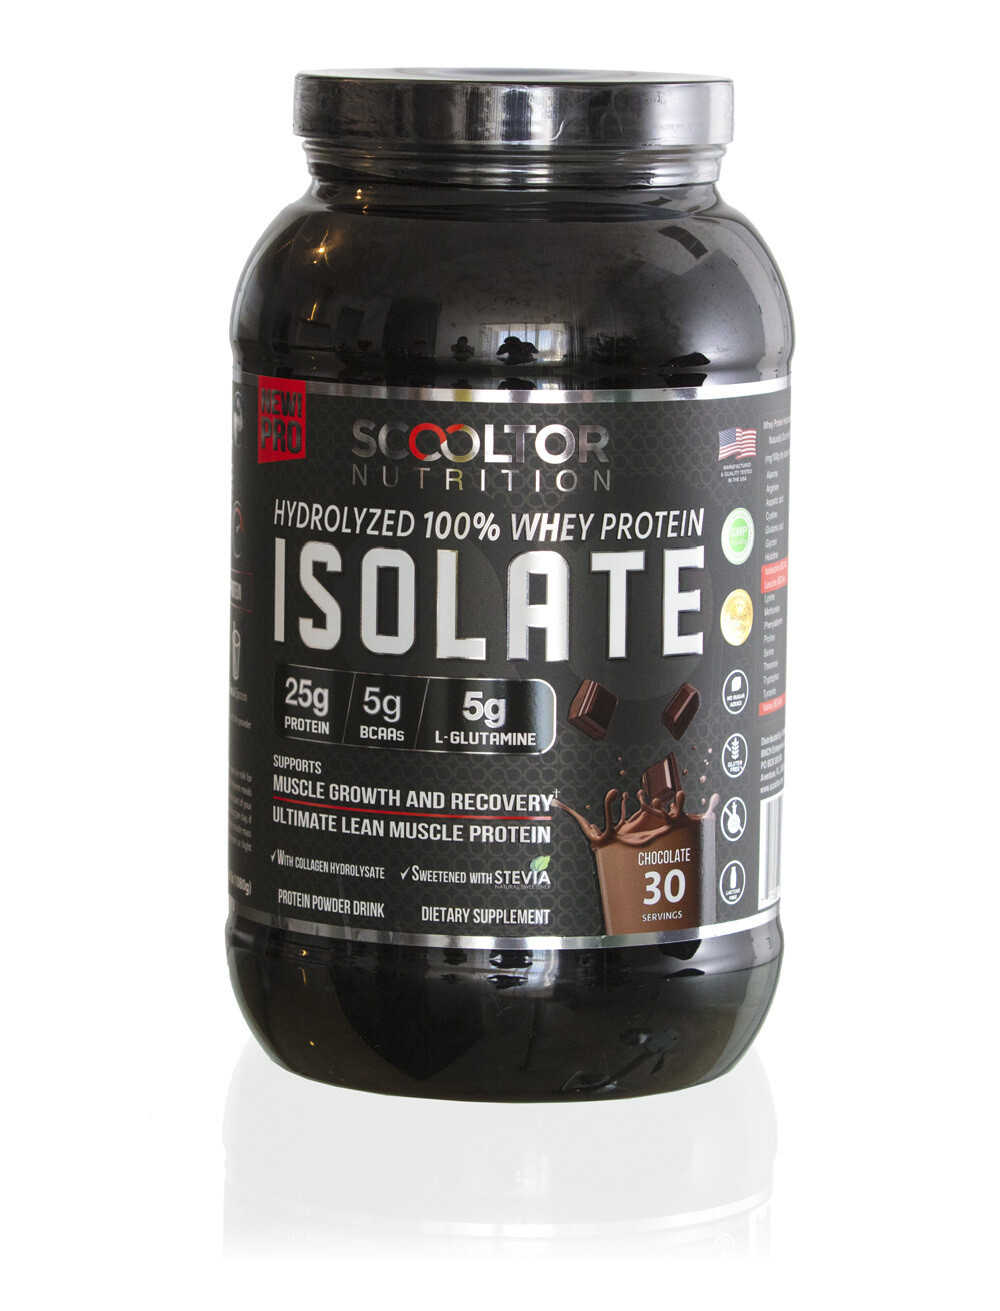 Scooltor Hydrolyzed 100% Whey Protein Isolate